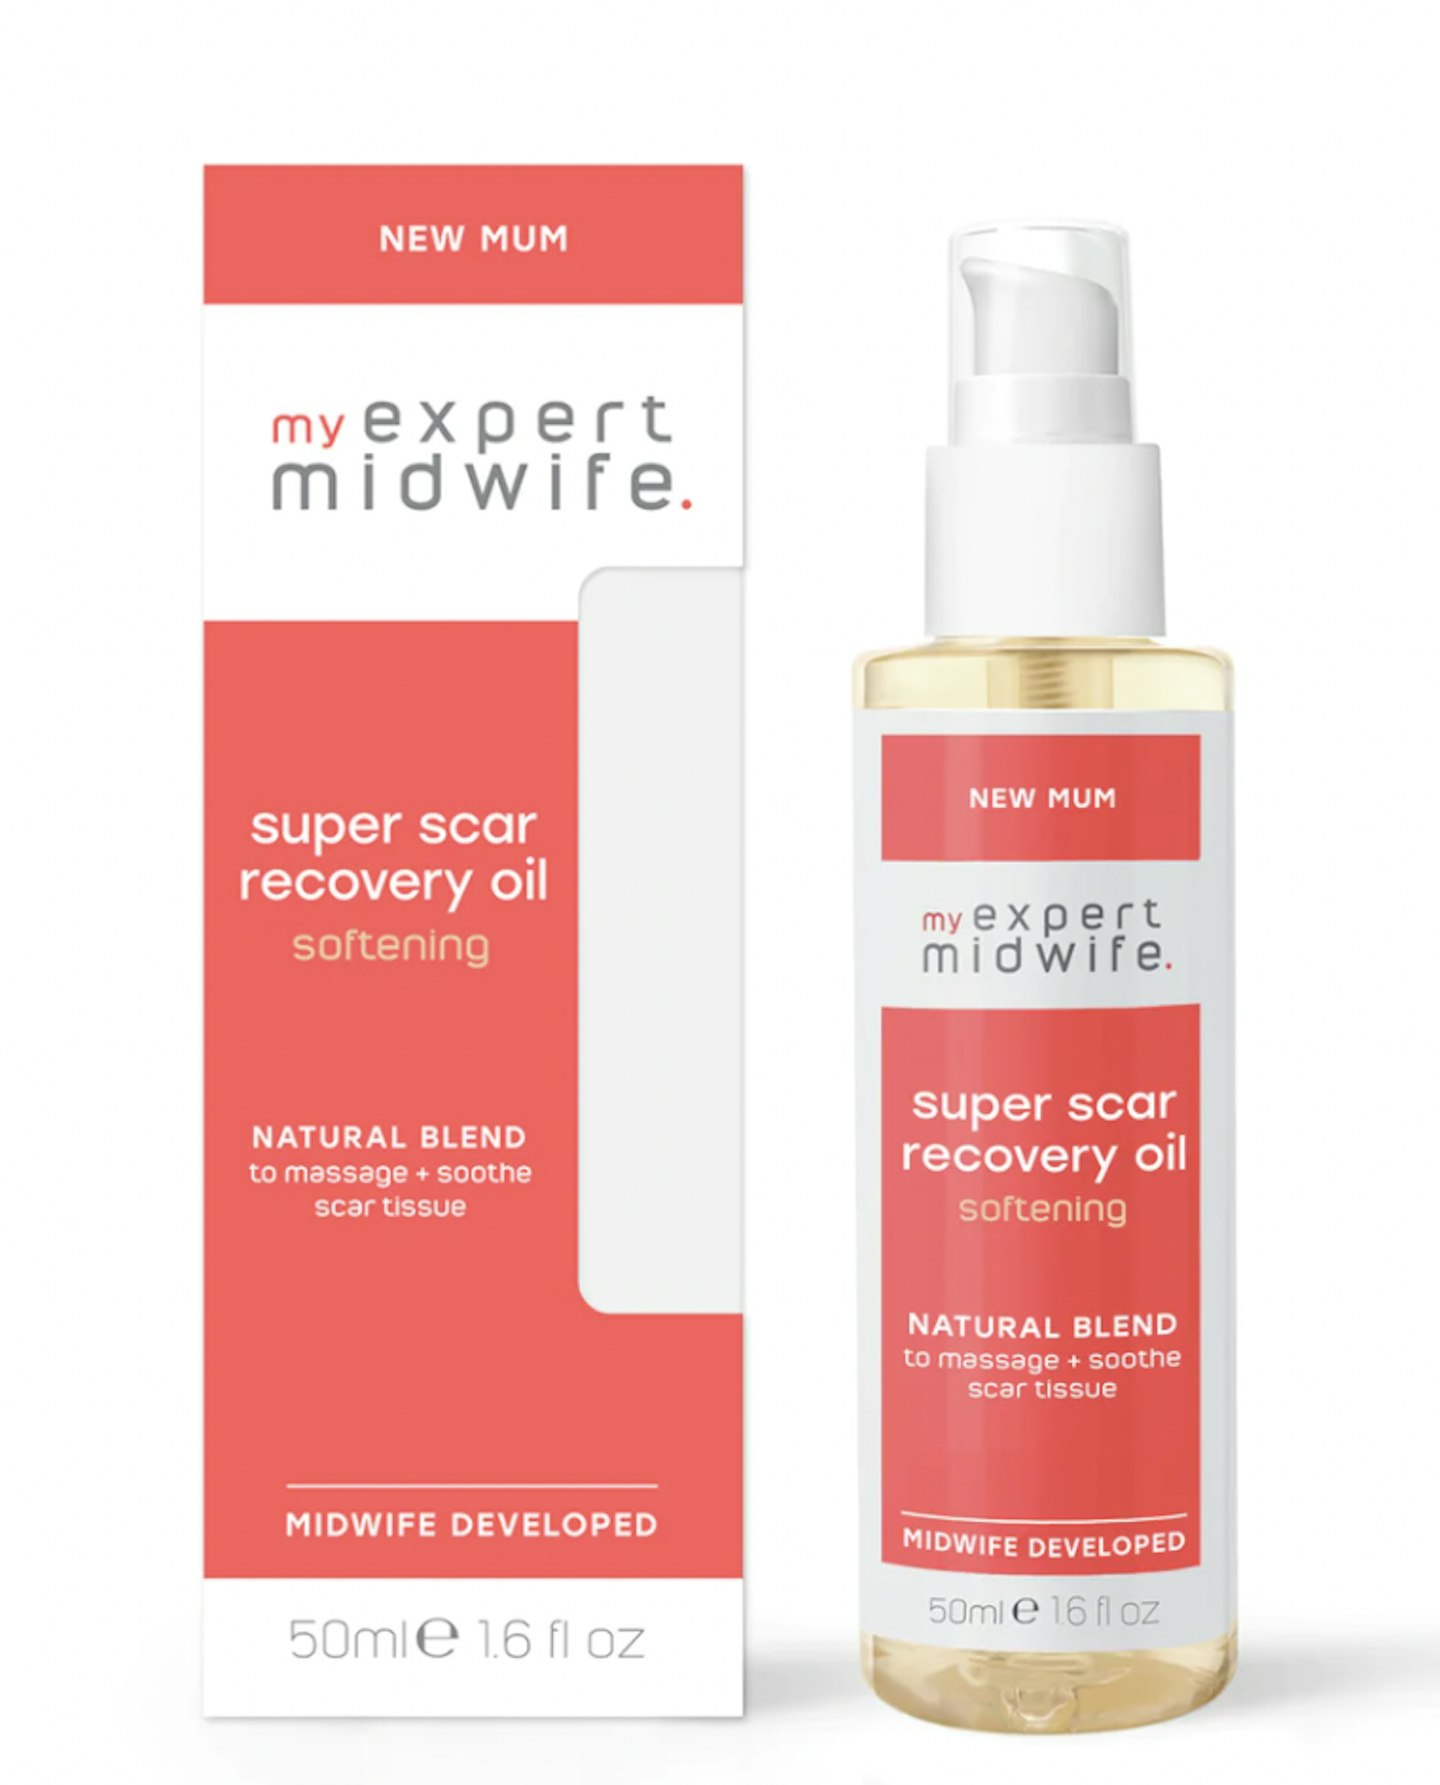 My Expert Midwife, Super Scar Recovery Oil